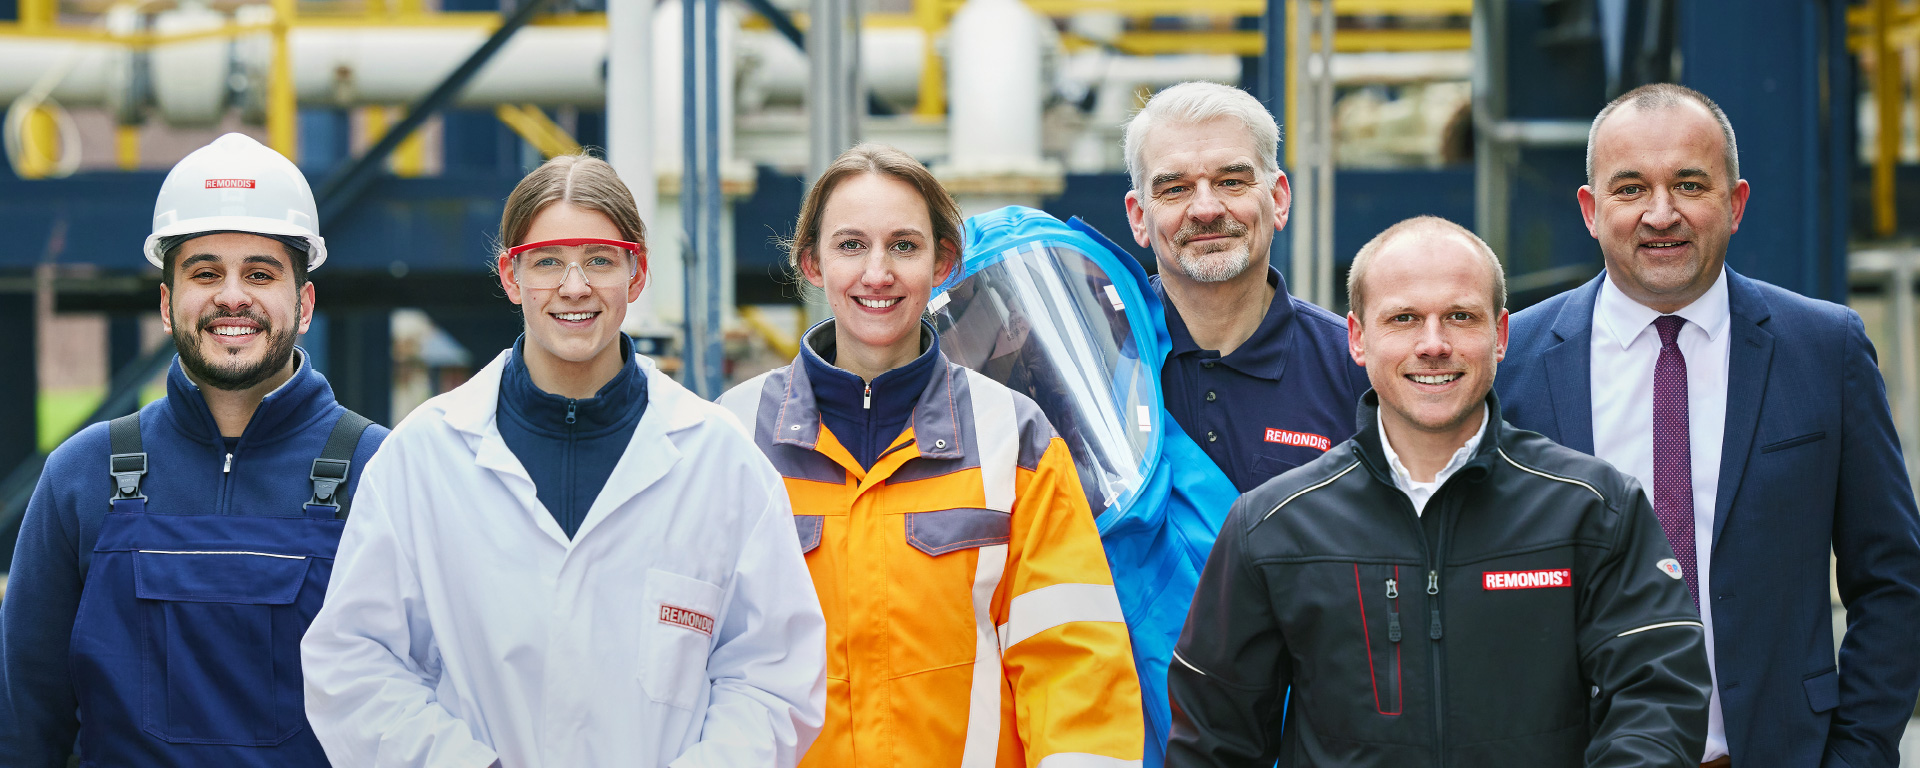 REMONDIS Industrie Service employees